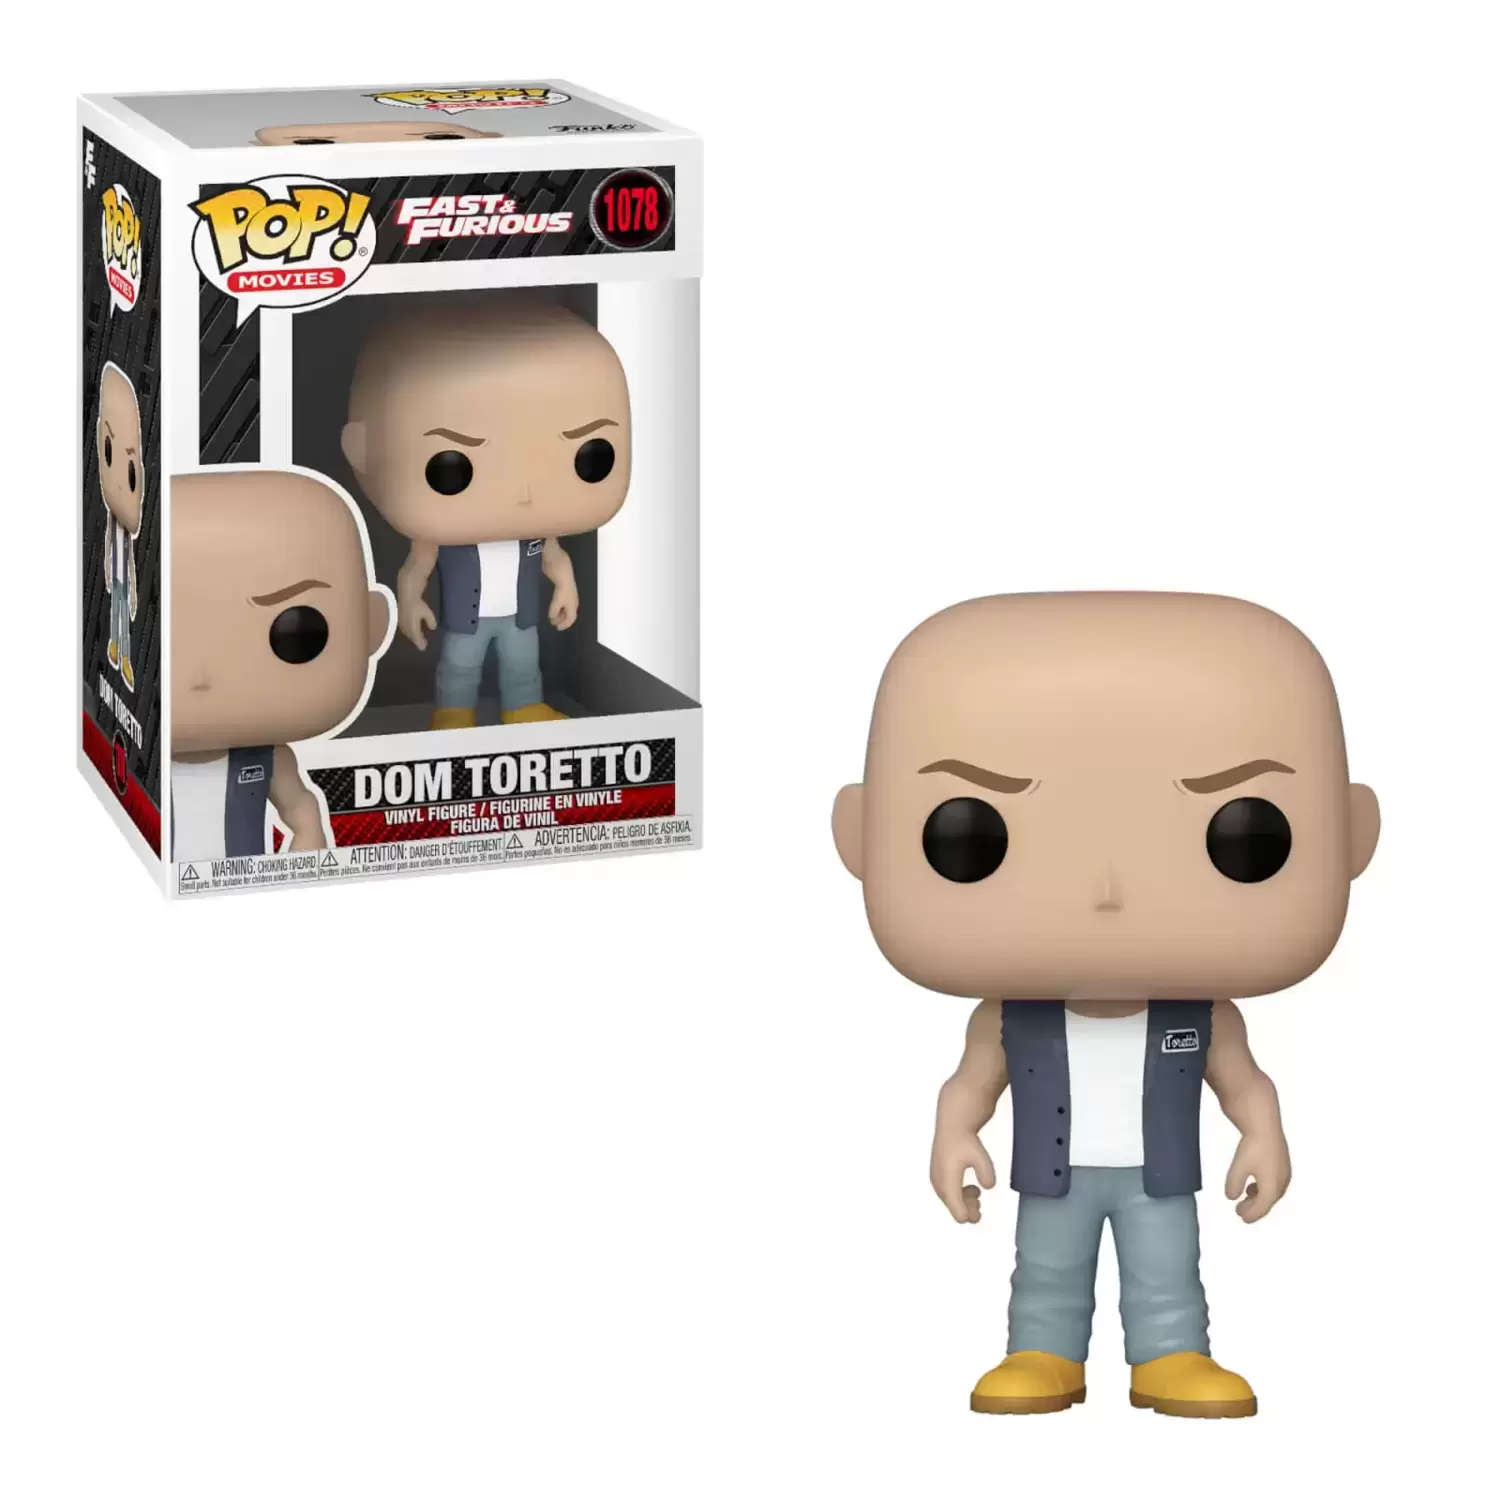 POP! Movies - Fast and Furious - Dominic Toretto